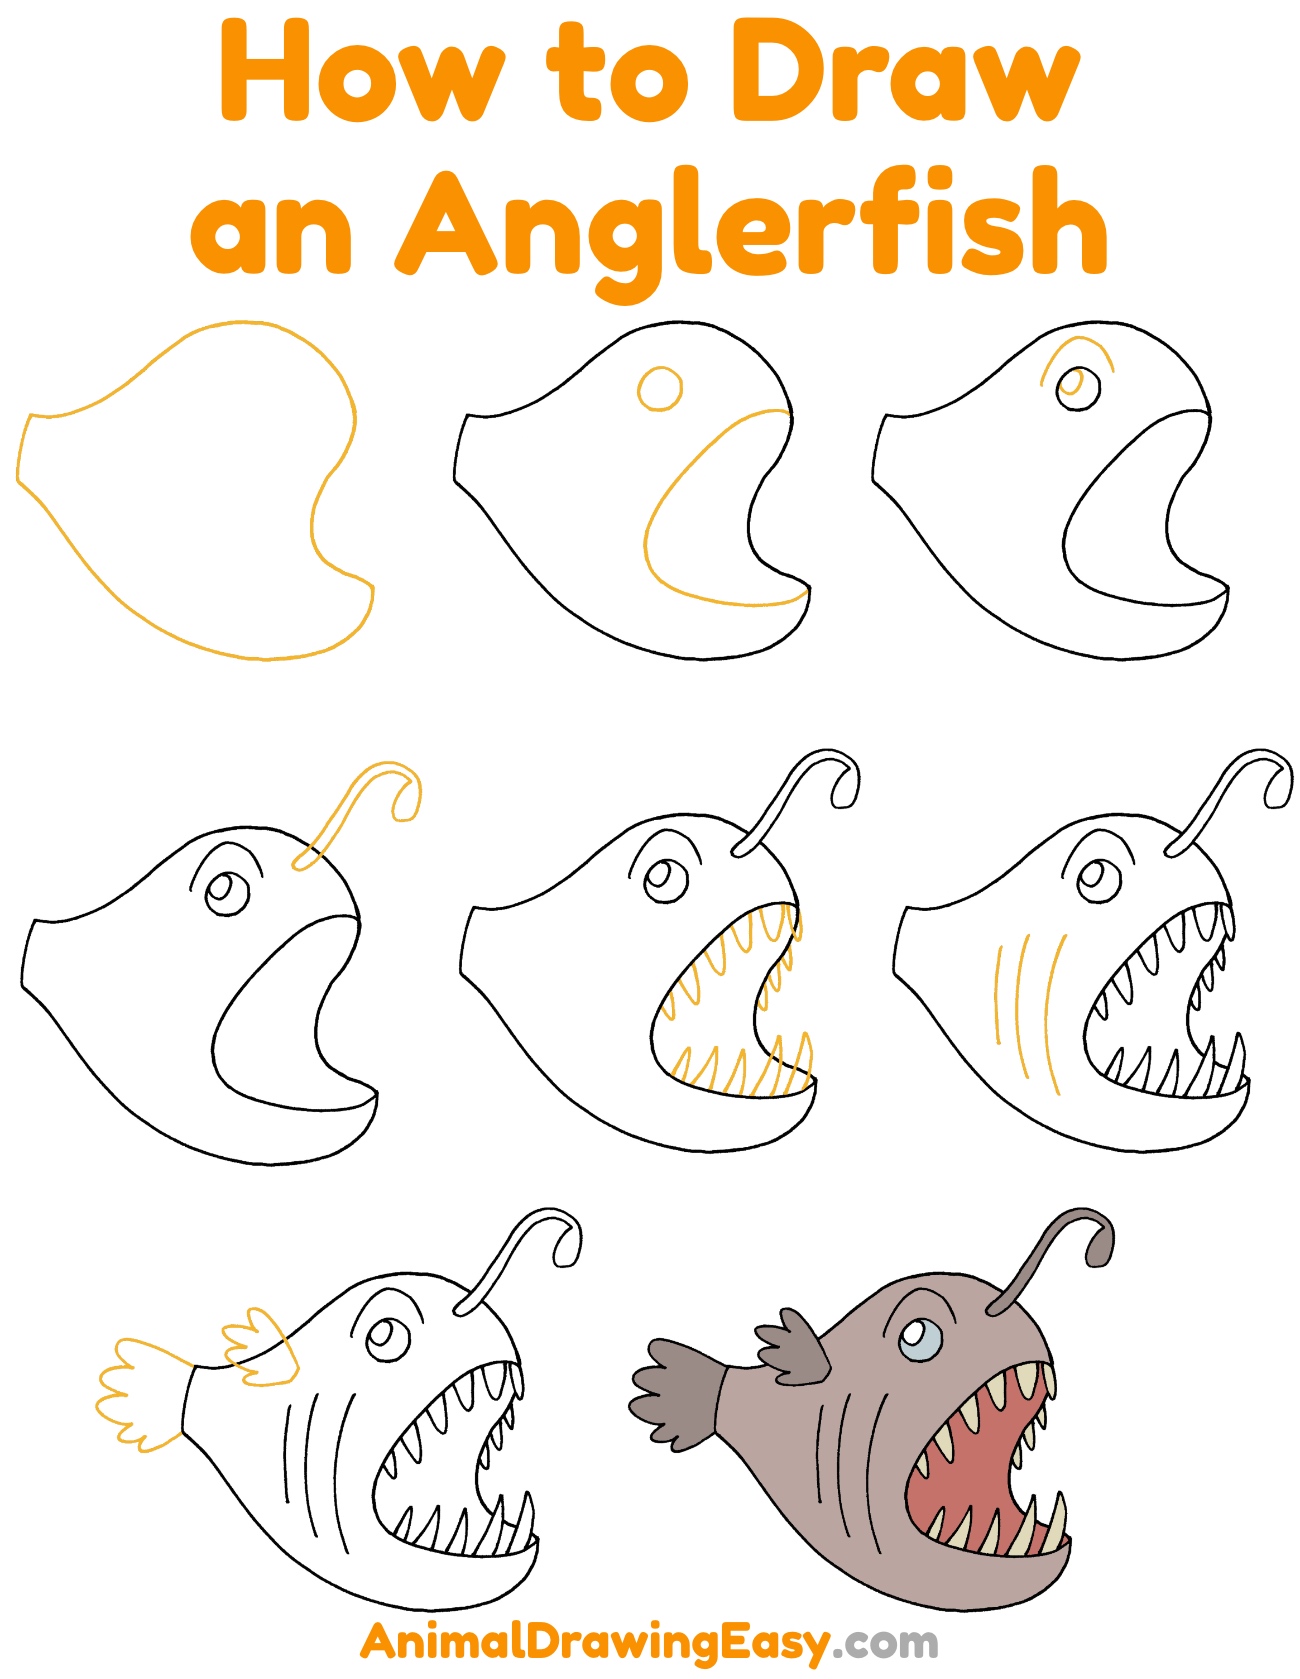 How to Draw an Anglerfish Step by Step